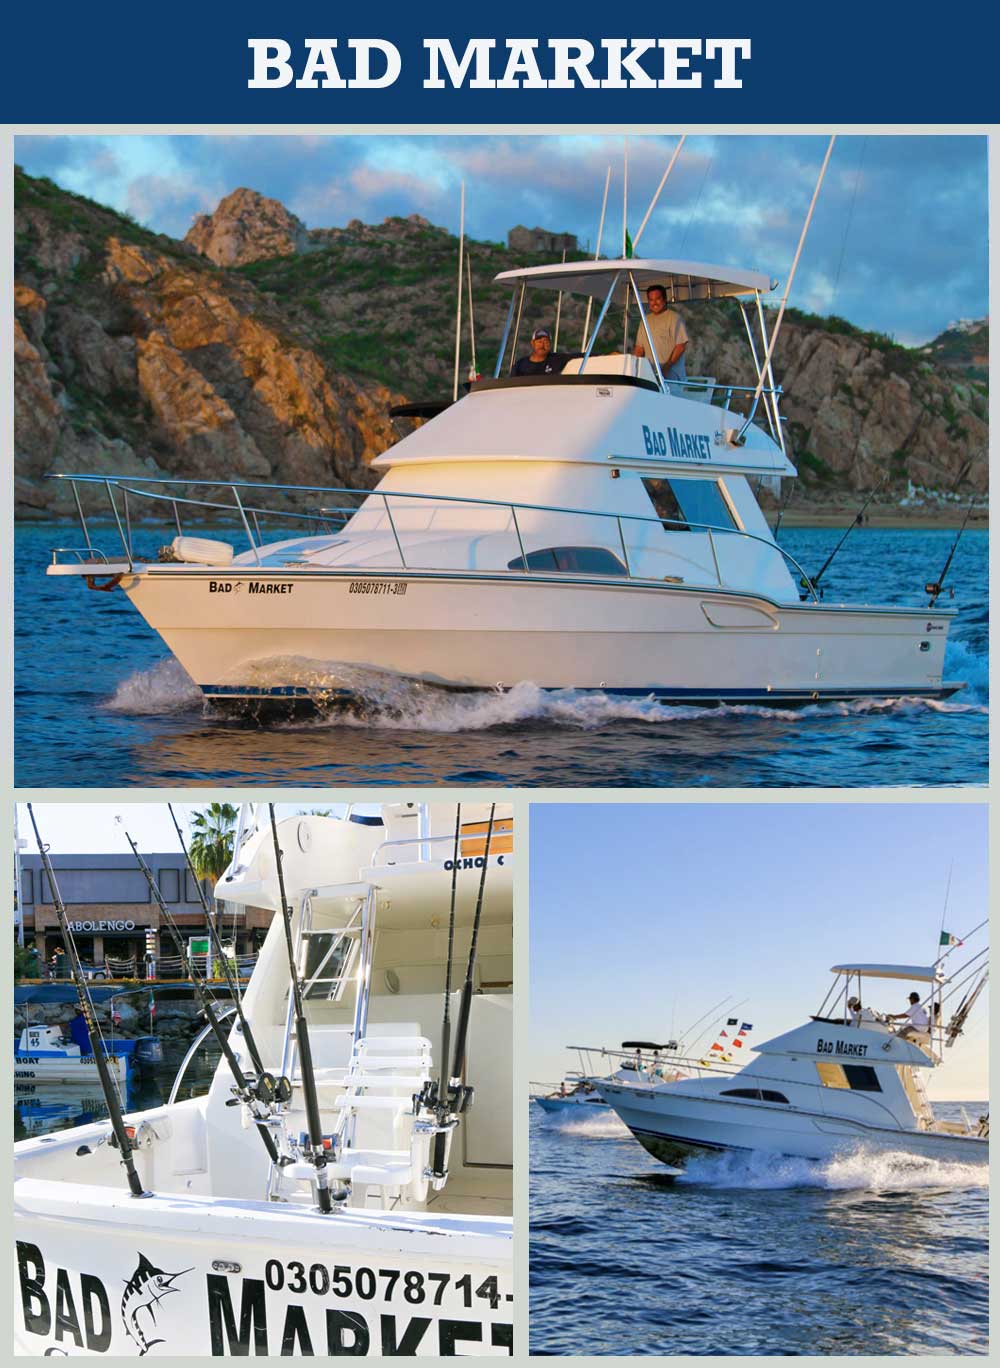 Cabo charter fishing boat, Reel Busy, Pochos